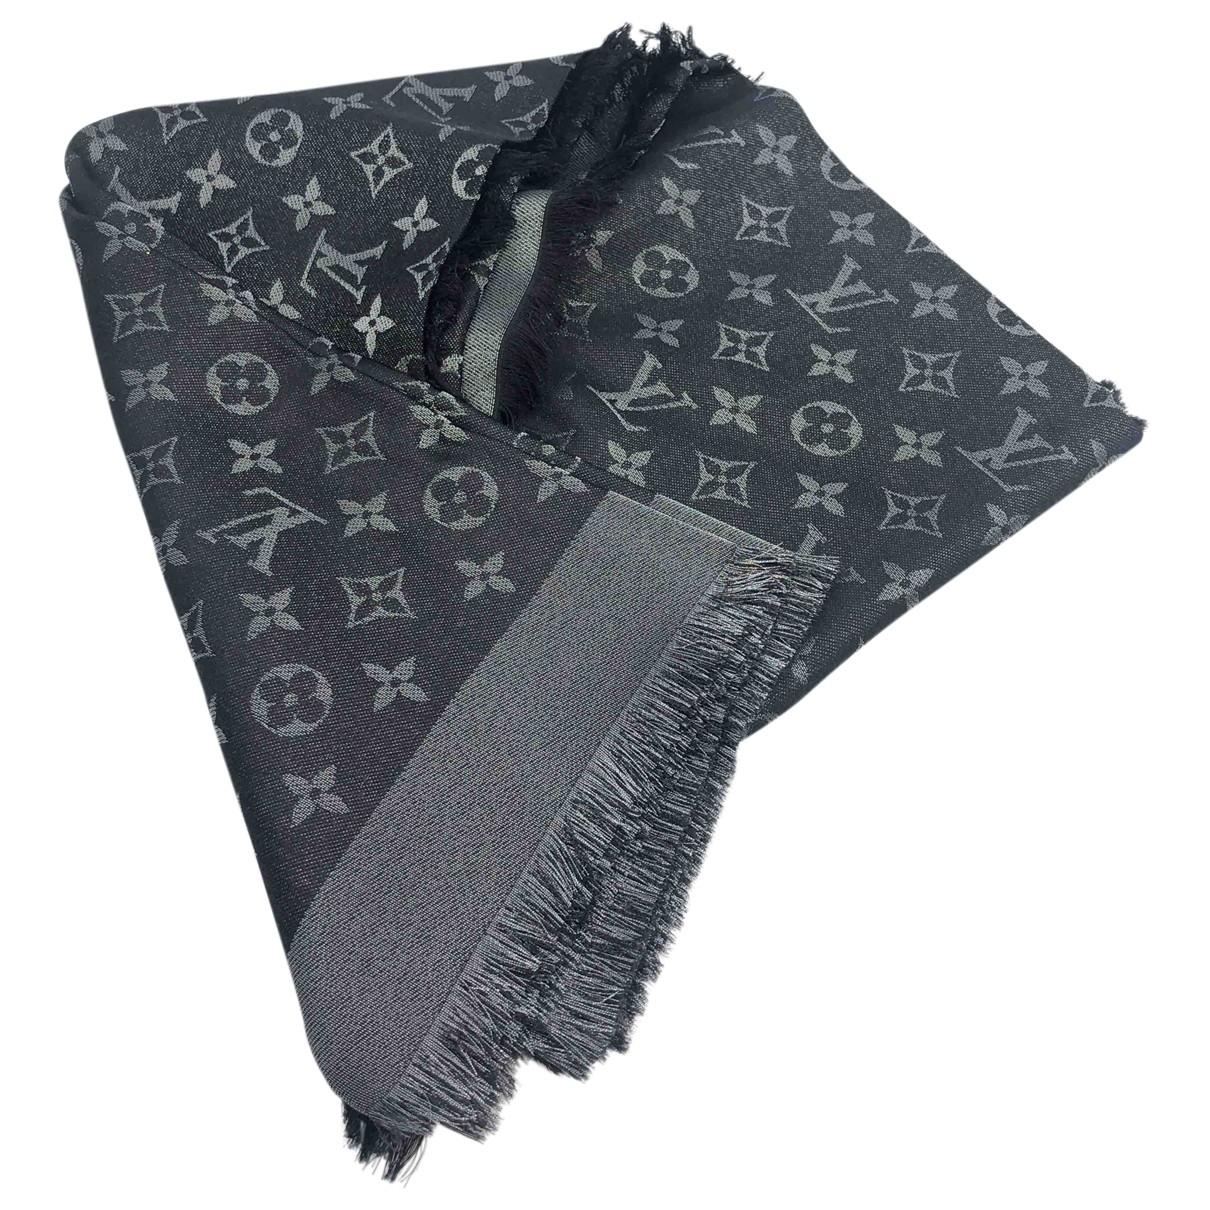 Louis Vuitton Faces Backlash for Selling Keffiyeh-Inspired Scarf